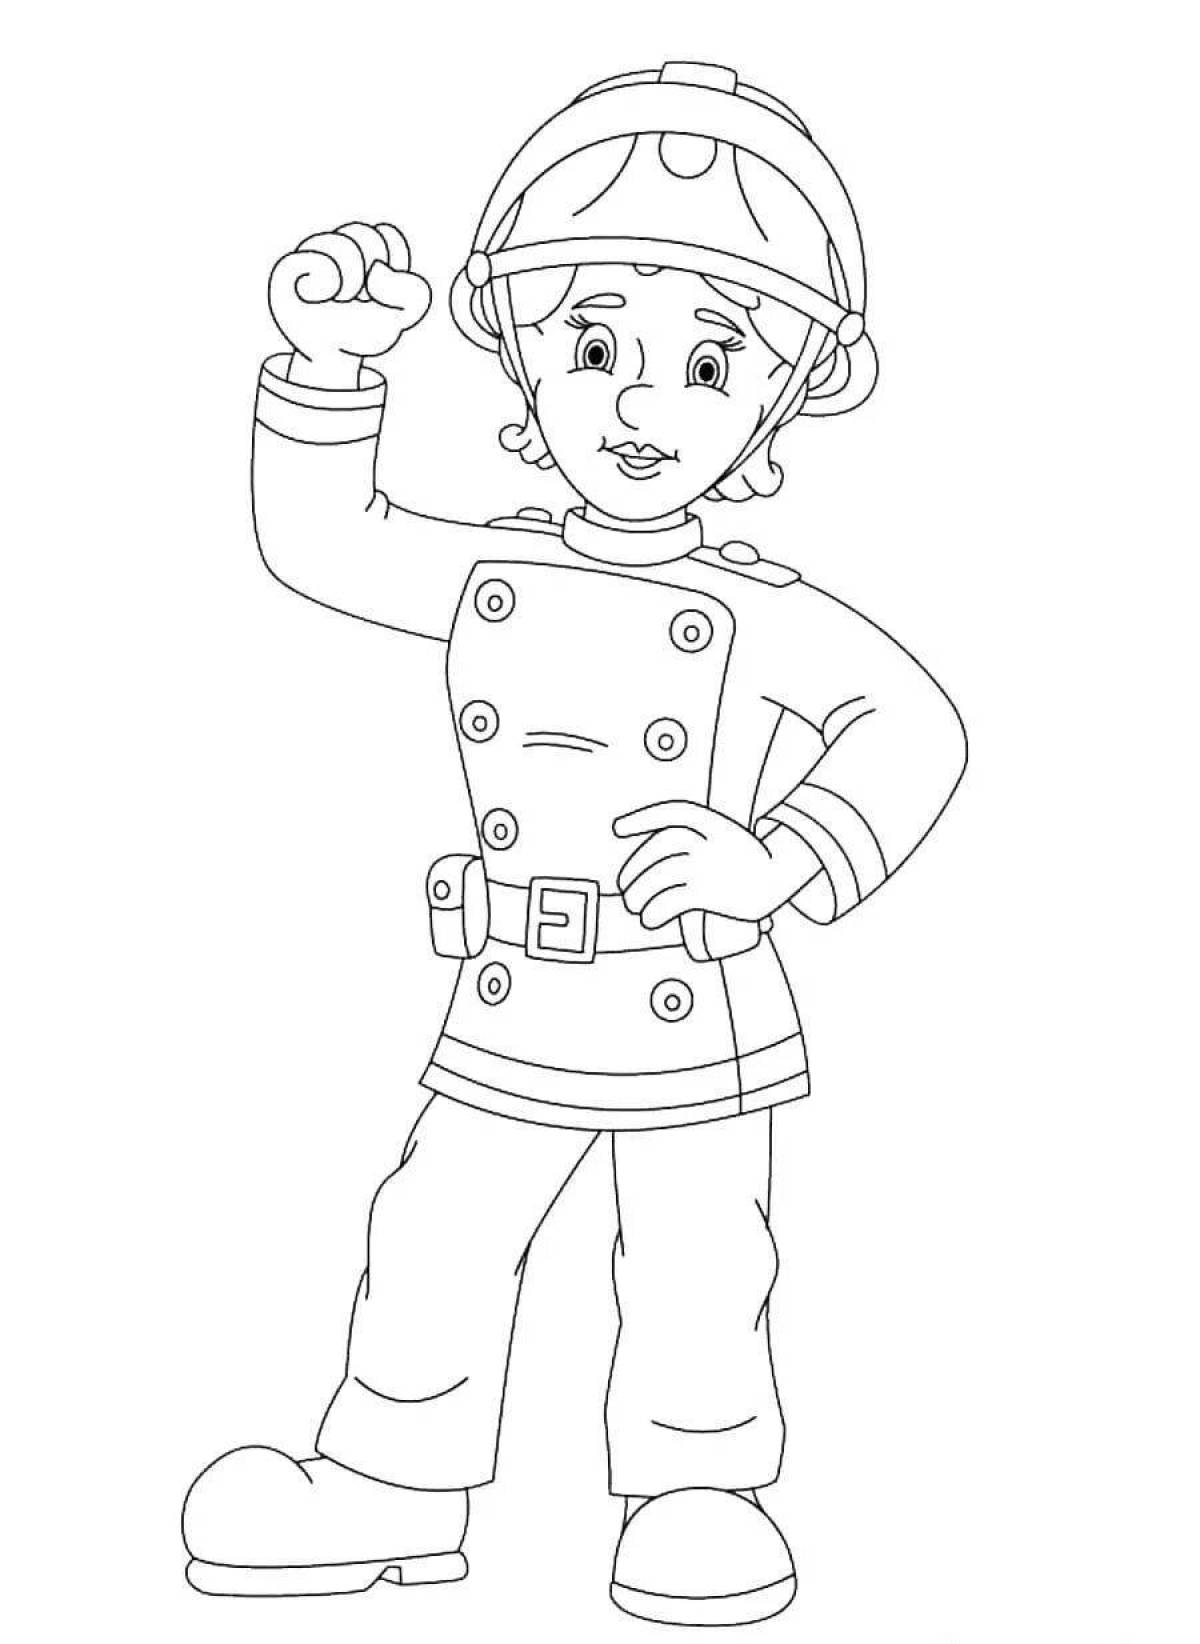 Coloring book the incredible profession of a fireman